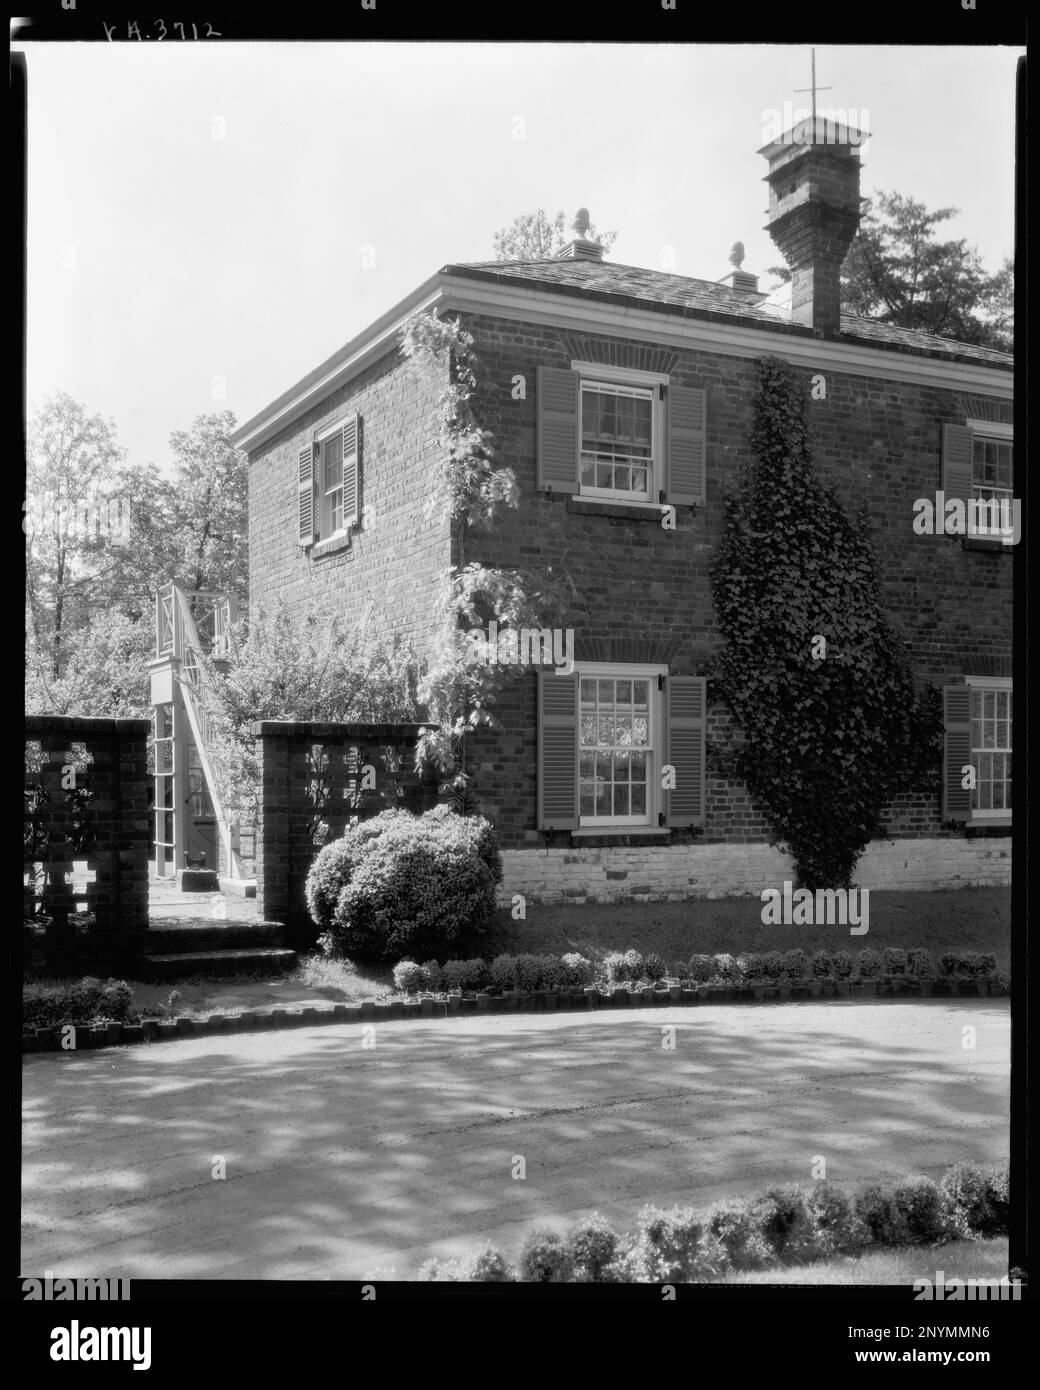 Nordley, 4203 Sulgrave Road, Richmond, Henrico County, Virginia. Carnegie Survey of the Architecture of the South. United States  Virginia  Henrico County  Richmond, Dovecotes, Walls, Brickwork, Mansions. Stock Photo